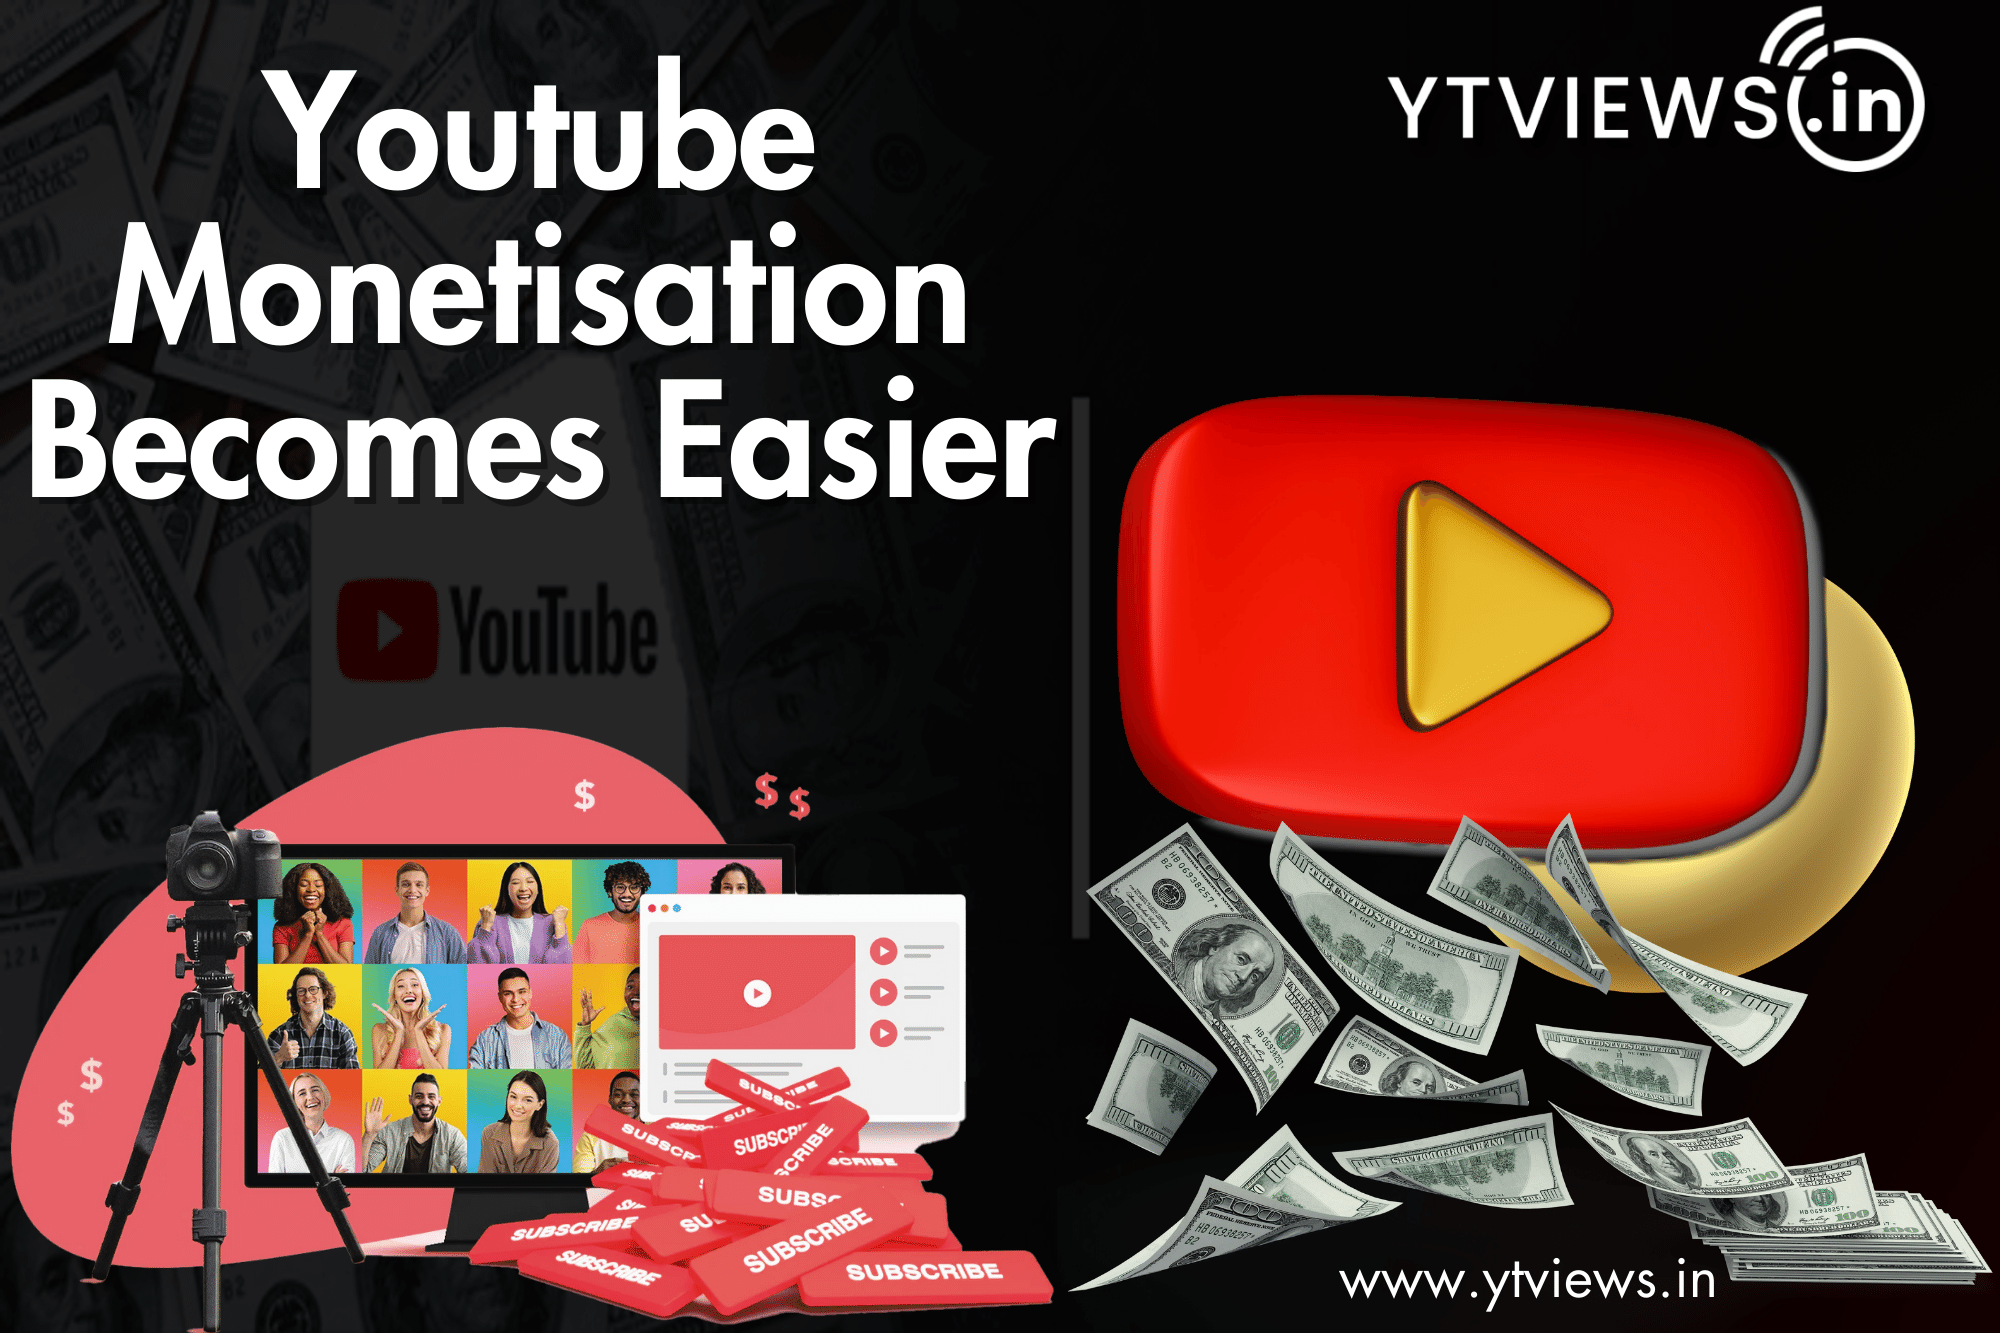 YouTube drastically changes monetization requirements, making it easier for creators to start generating revenue